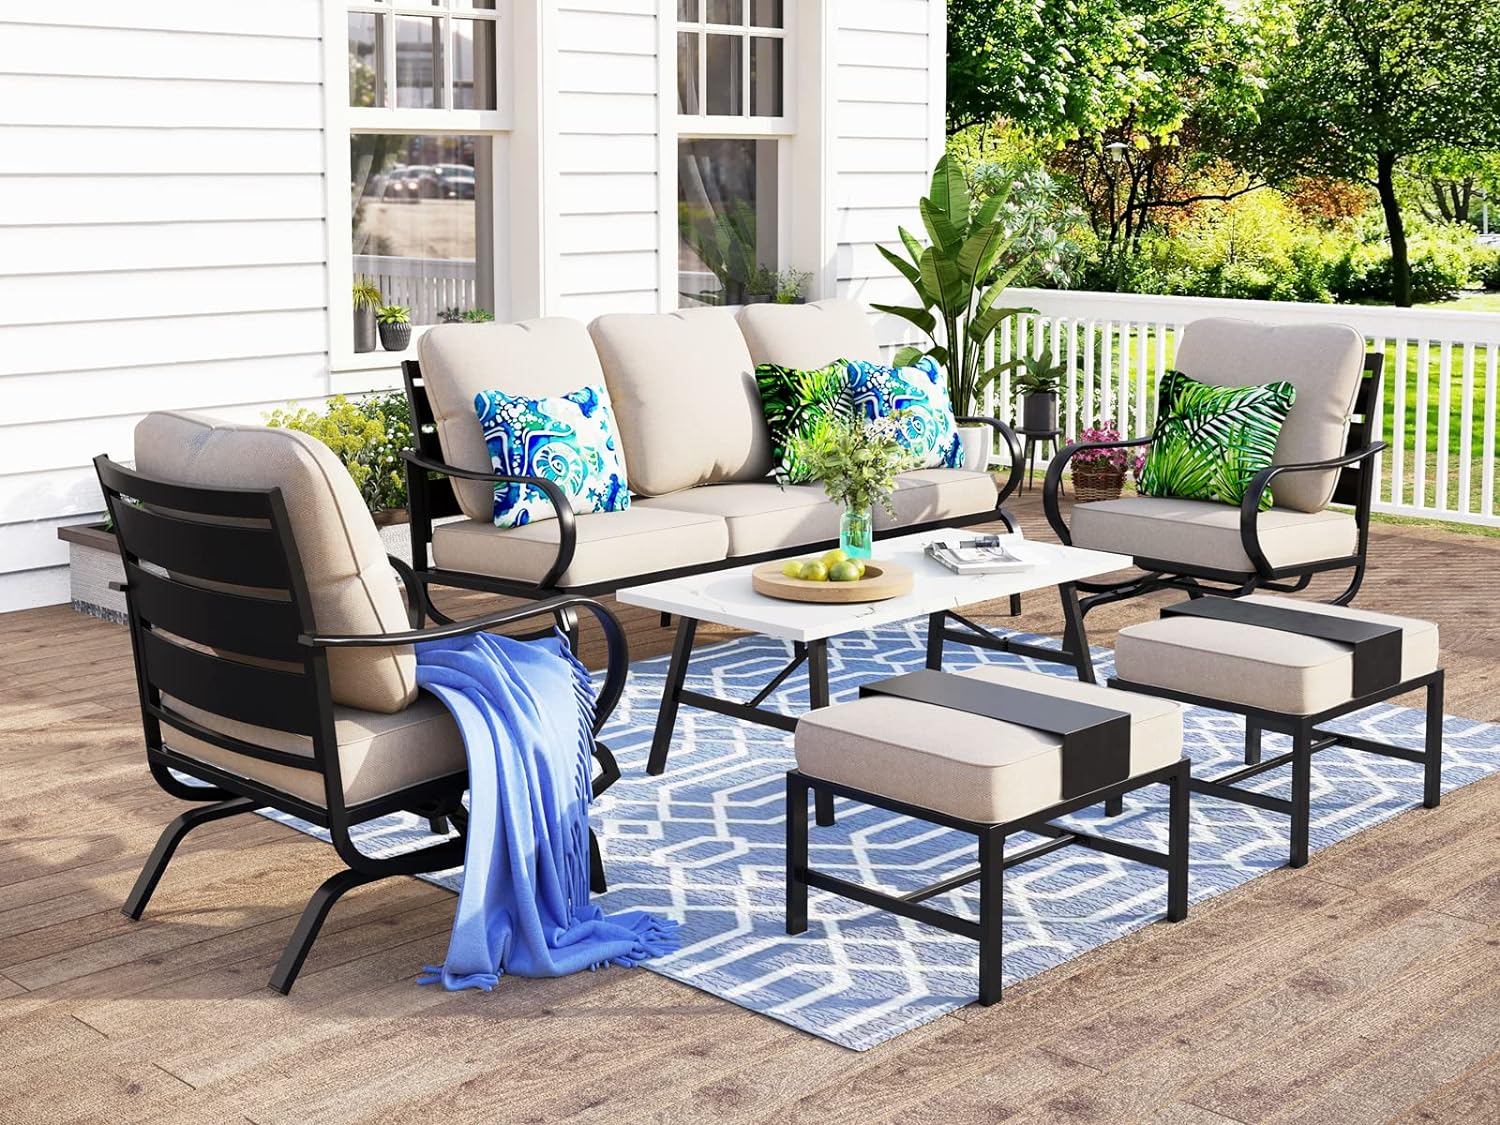 MFSTUDIO 6 Pieces Patio Conversation Sets(7 Seat),Outdoor Metal Furniture Sofas with 1 x 3-Seat Sofa,2 Rocking Chairs,2 Ottoman and & 1 Coffee Table,Wrought Iron Frame with Beige Cushion